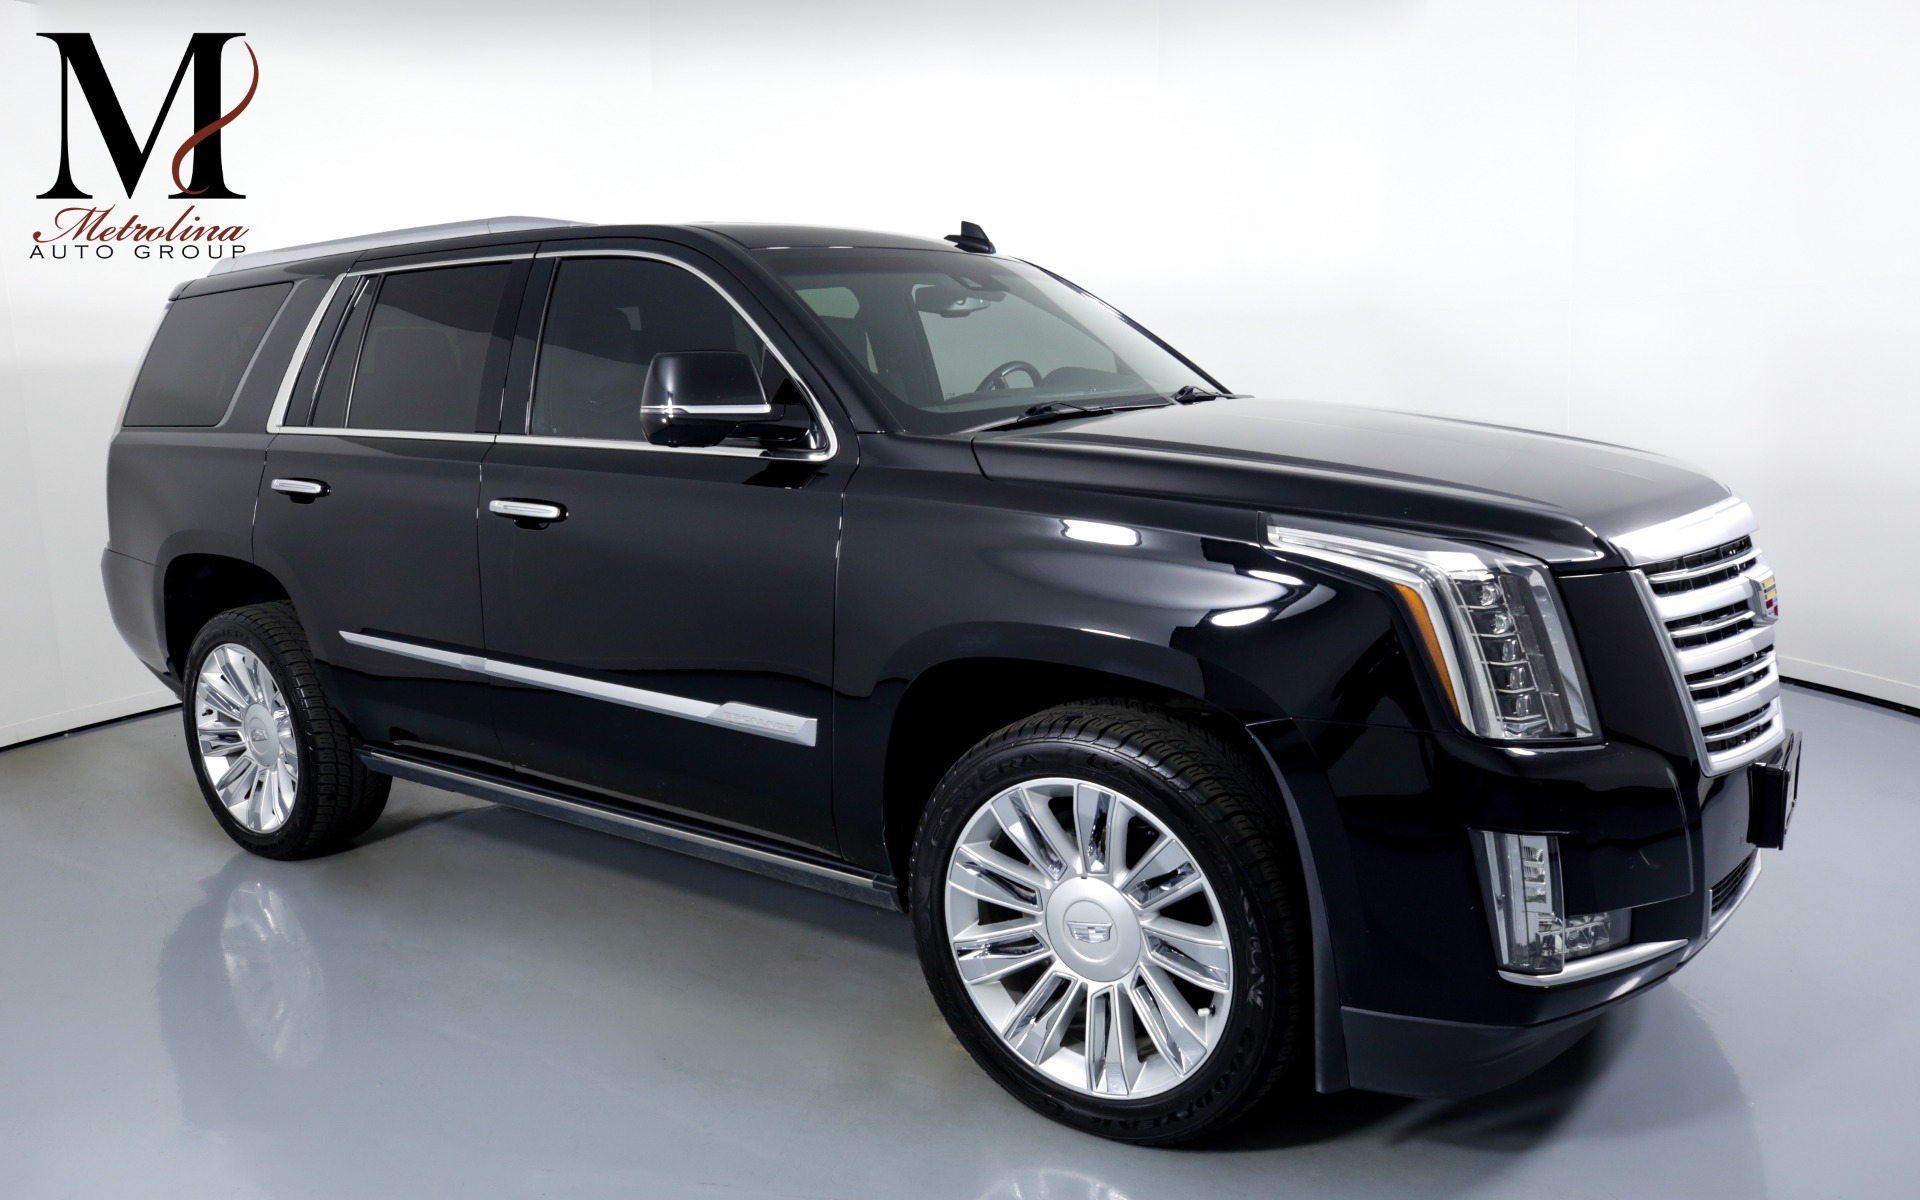 Used 2015 Cadillac Escalade Platinum for sale $49,995 at Metrolina Auto Group in Charlotte NC 28217 - 1